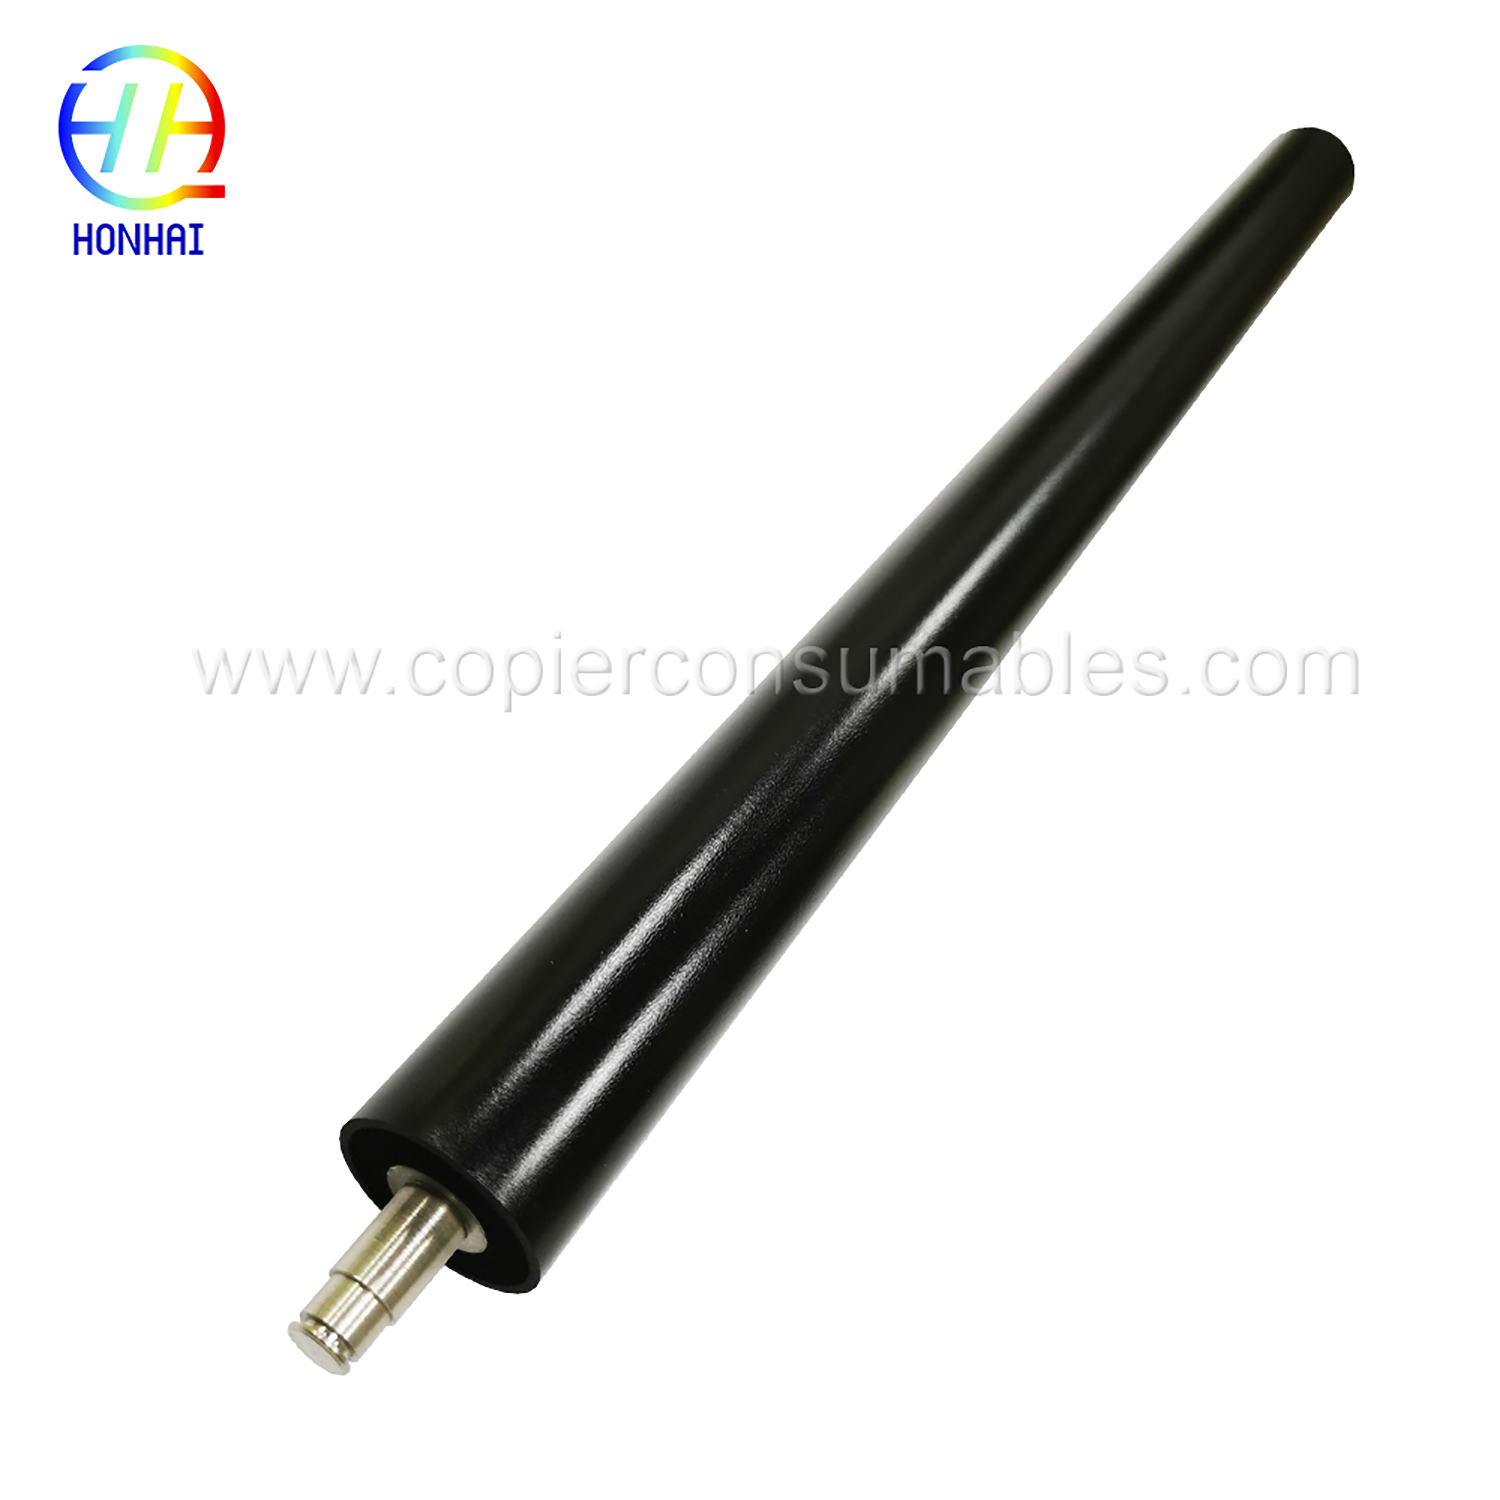 Factory wholesale Travel Hot Hair Rollers - 2nd Transfer Roller for Xerox DCC5065 7500 7550 6550 242 7600 250 7775 – HONHAI